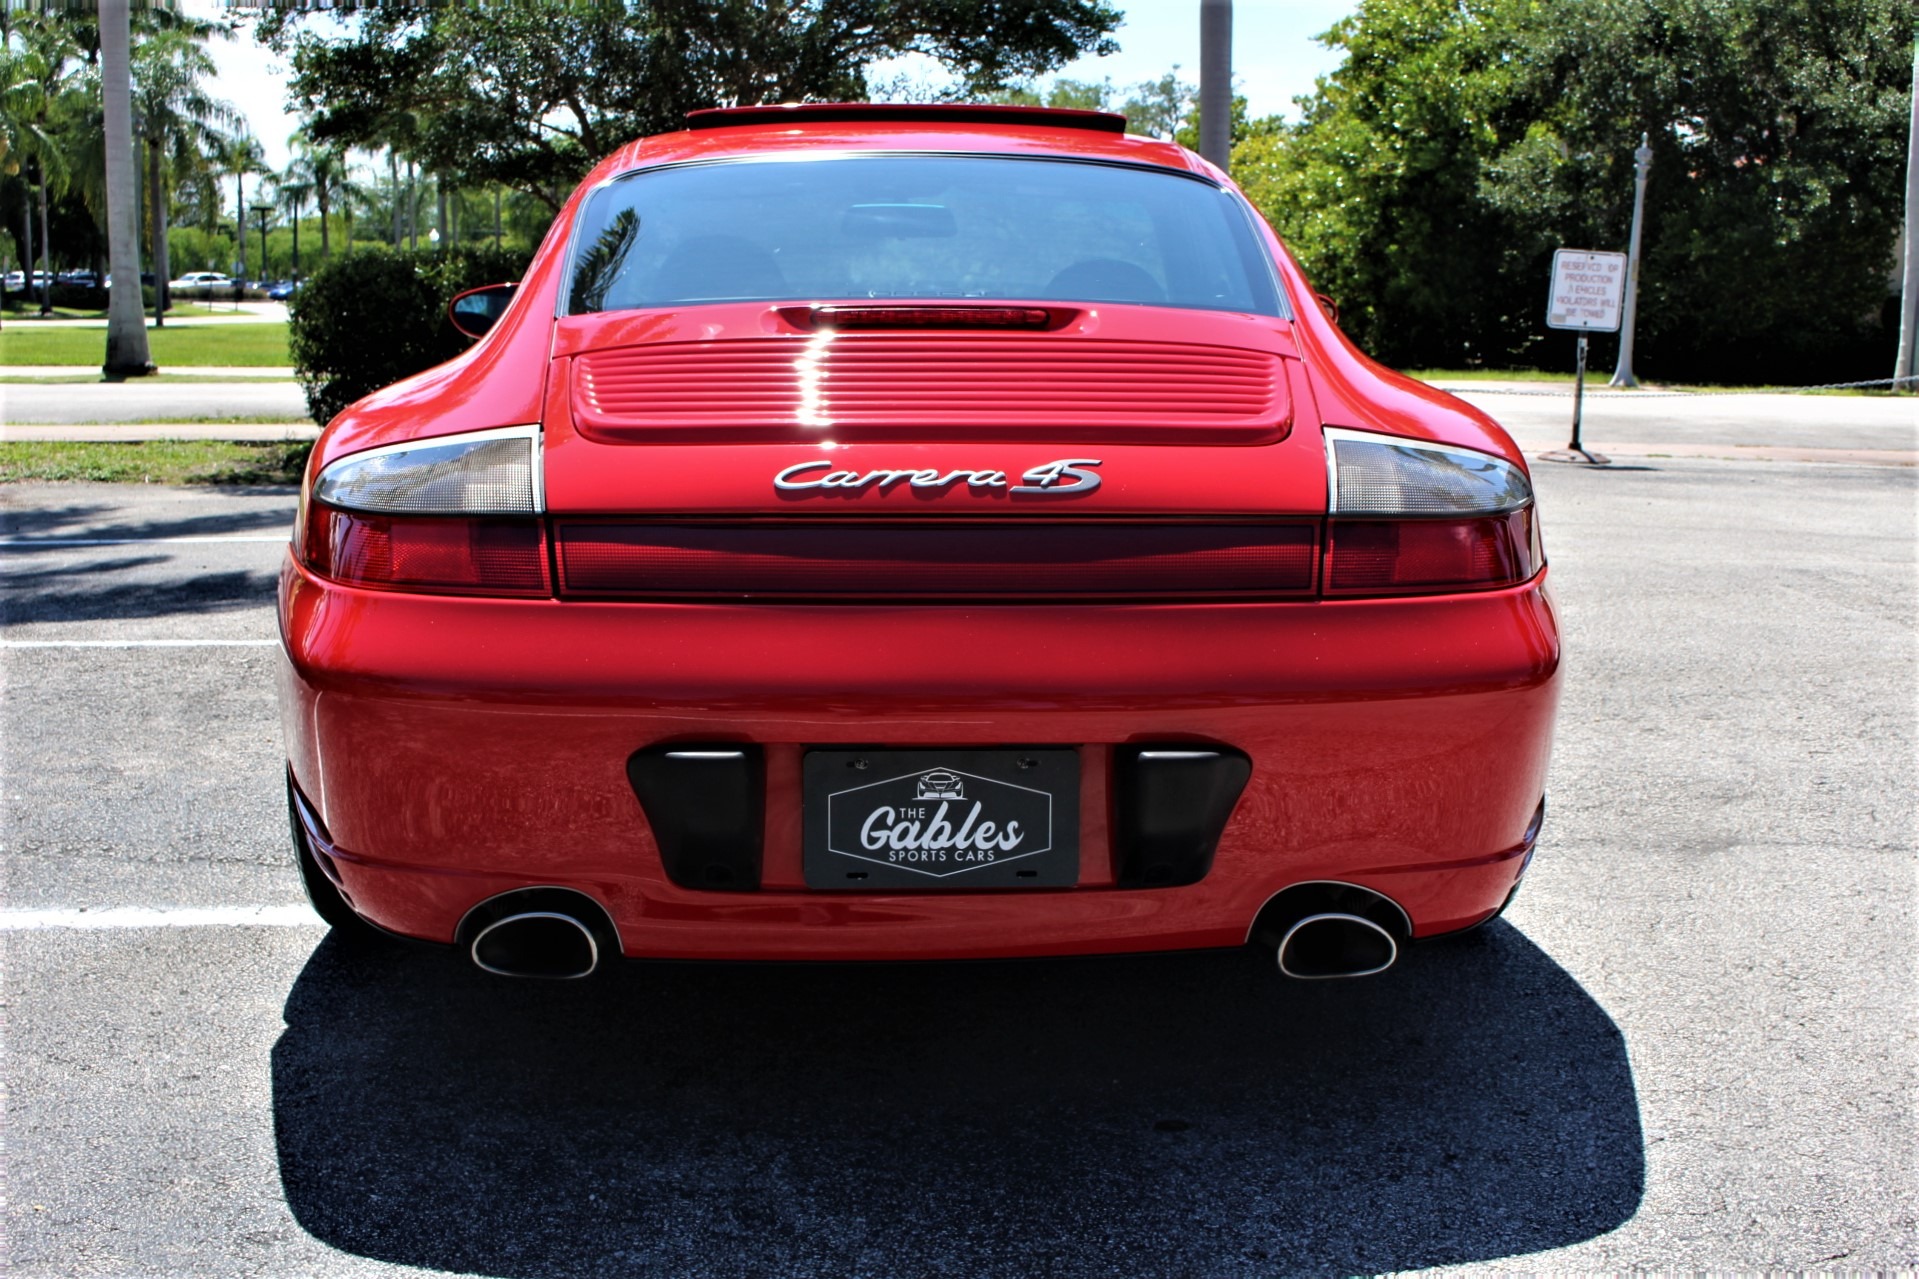 Used 2003 Porsche 911 Carrera 4S for sale Sold at The Gables Sports Cars in Miami FL 33146 4